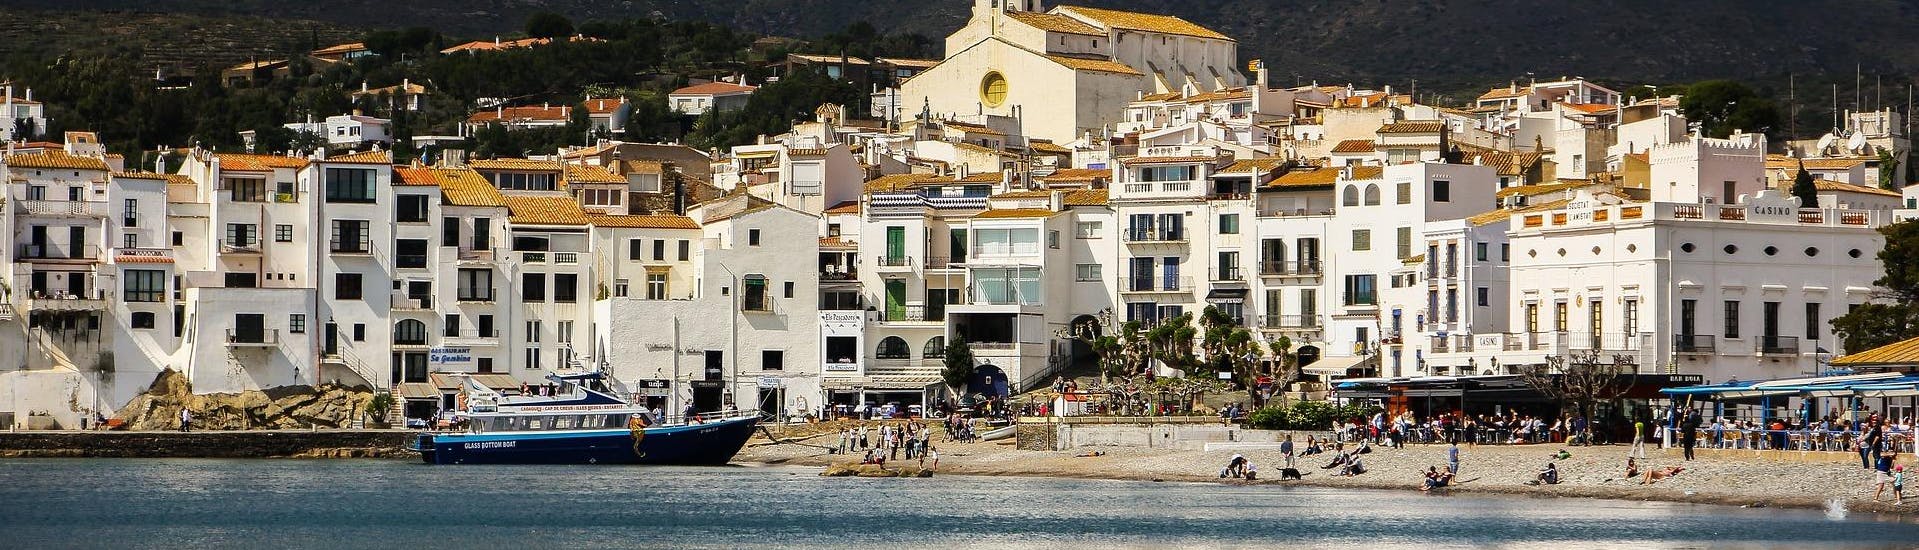 View of the coast during a boat trip to Cadaqués.